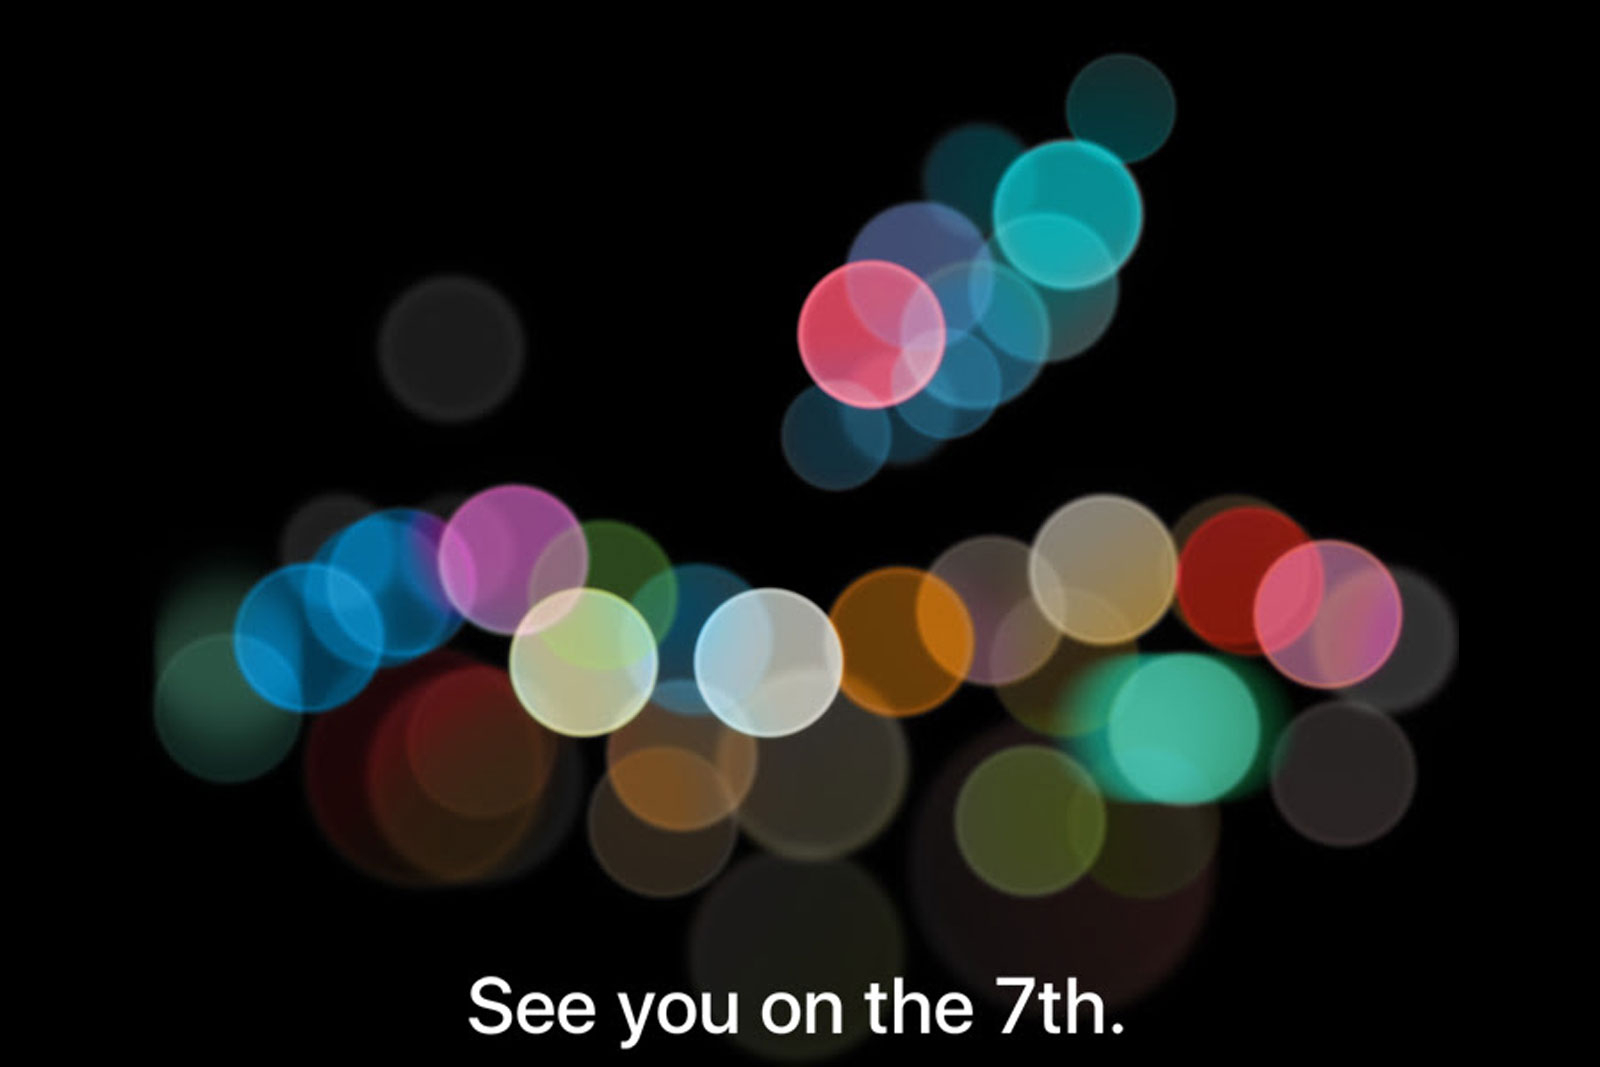 Apple event "See you on the 7th" to introduce the new iPhone and allegedly a new iPad Pro